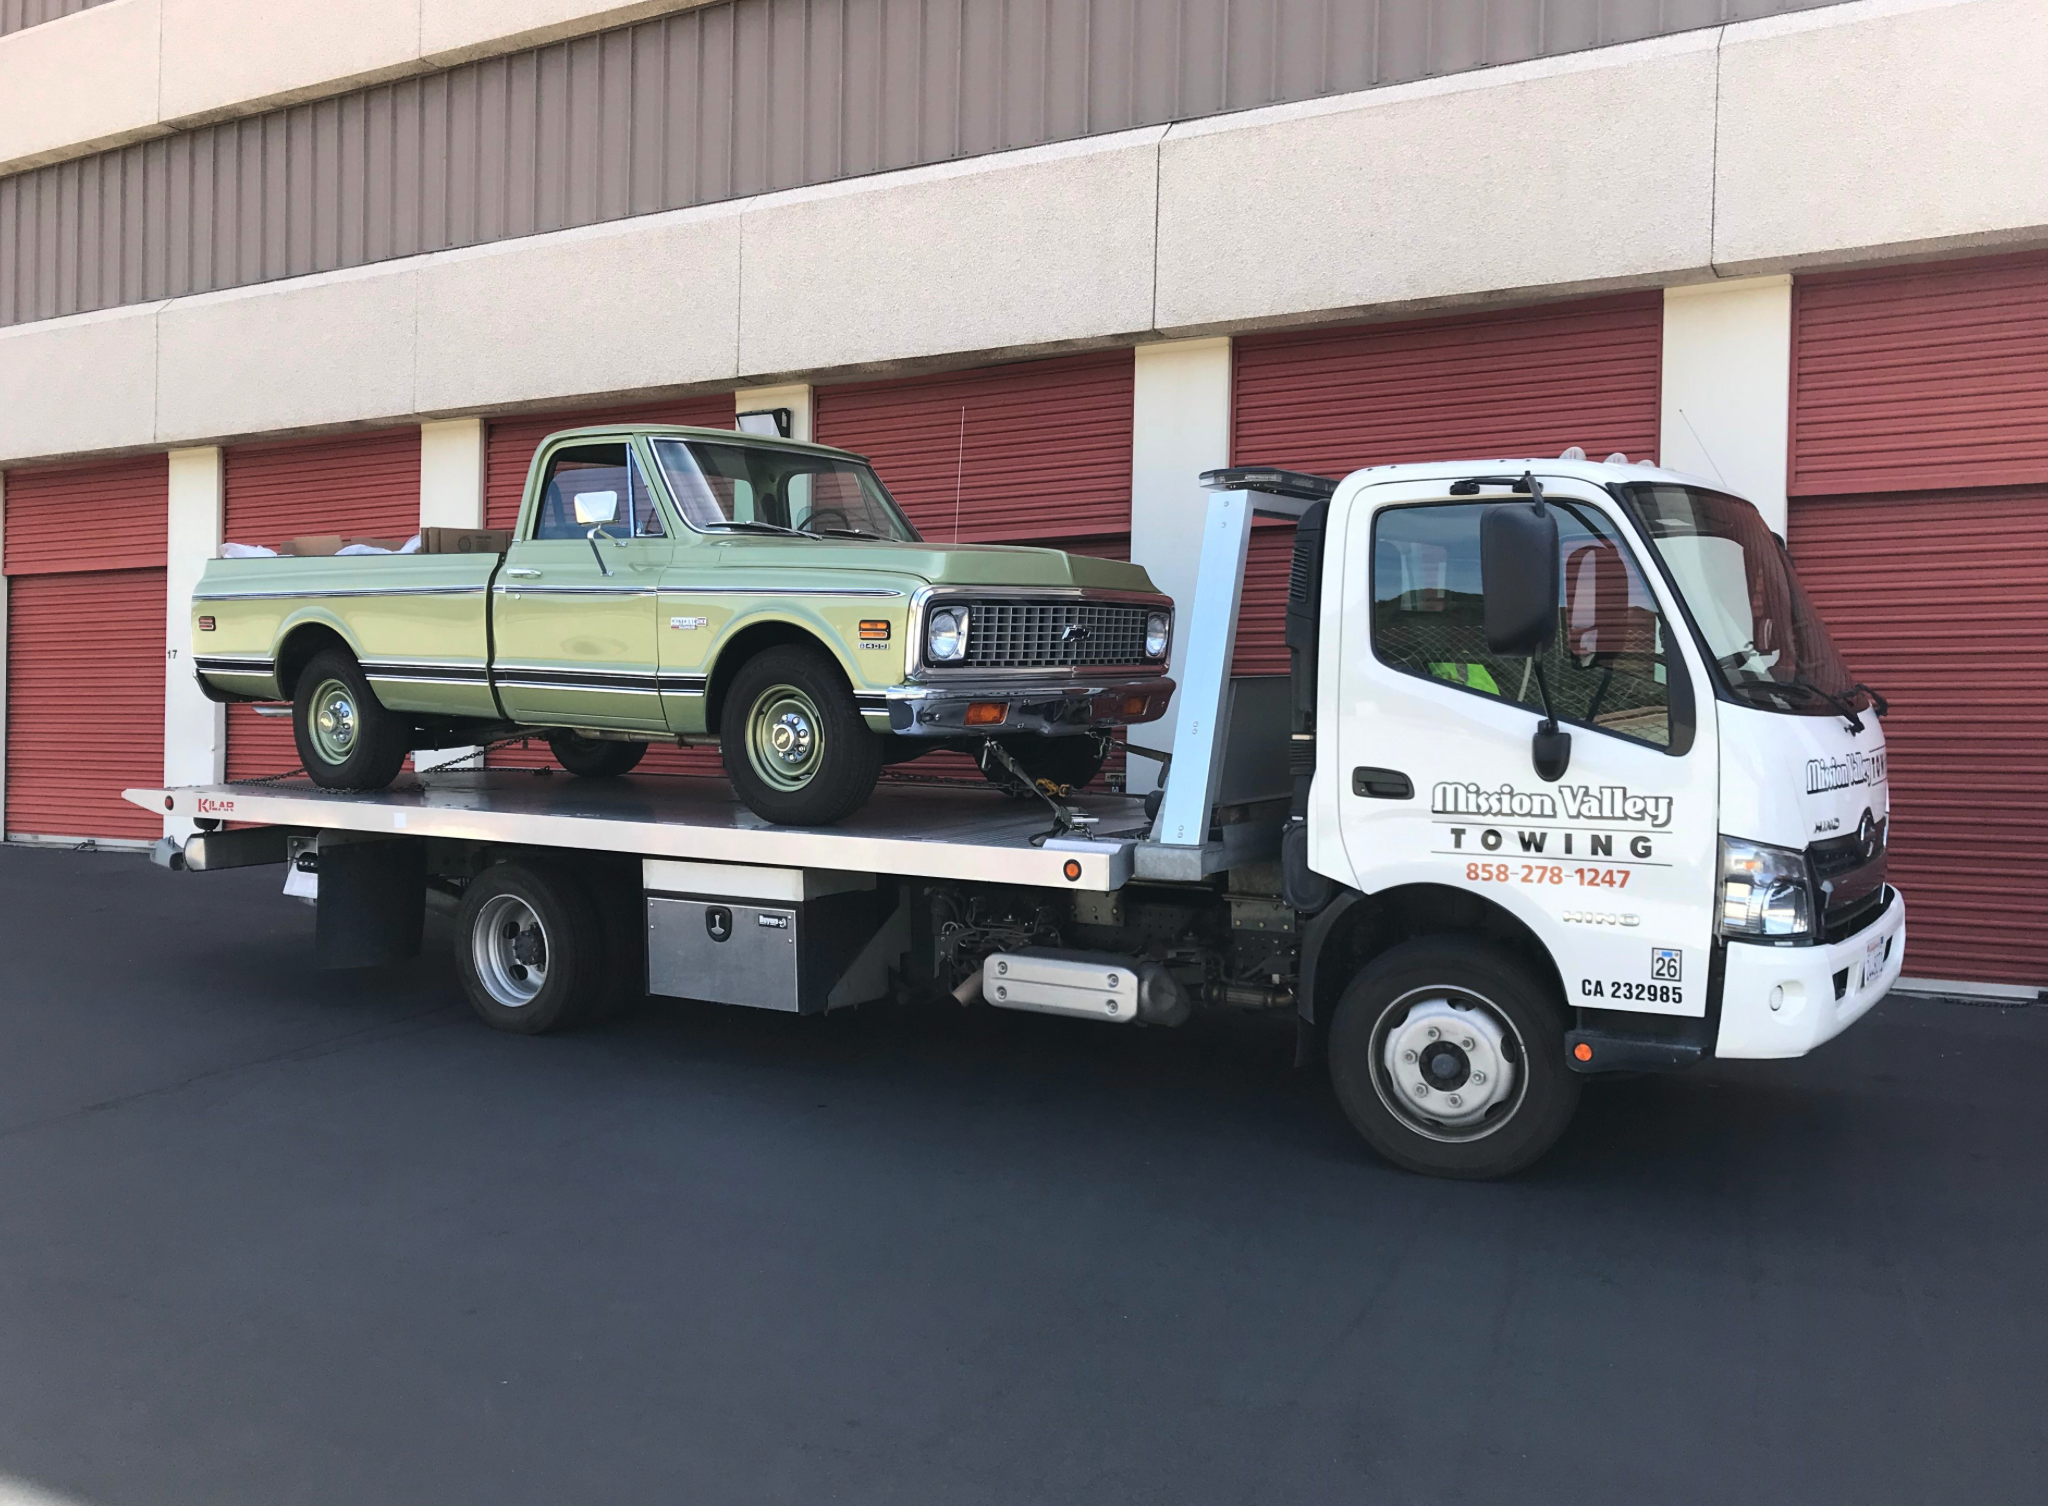 mission valley towing